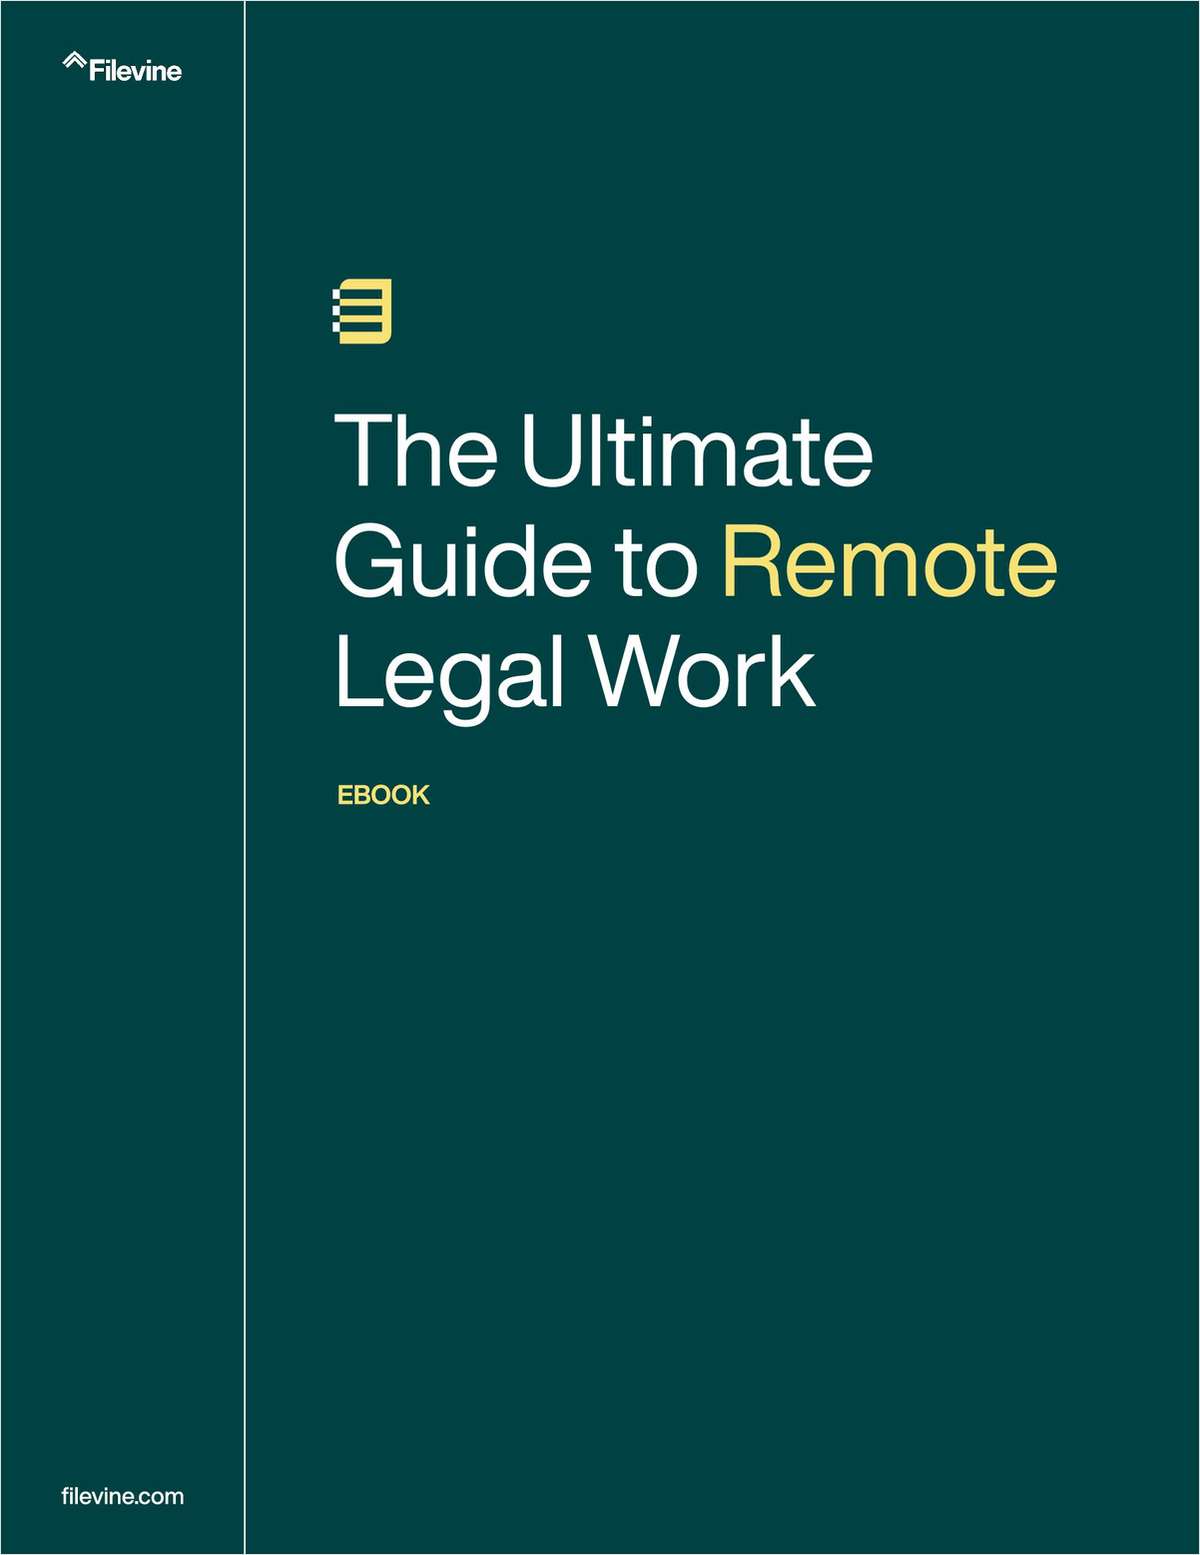 The Ultimate Guide to Remote Legal Work